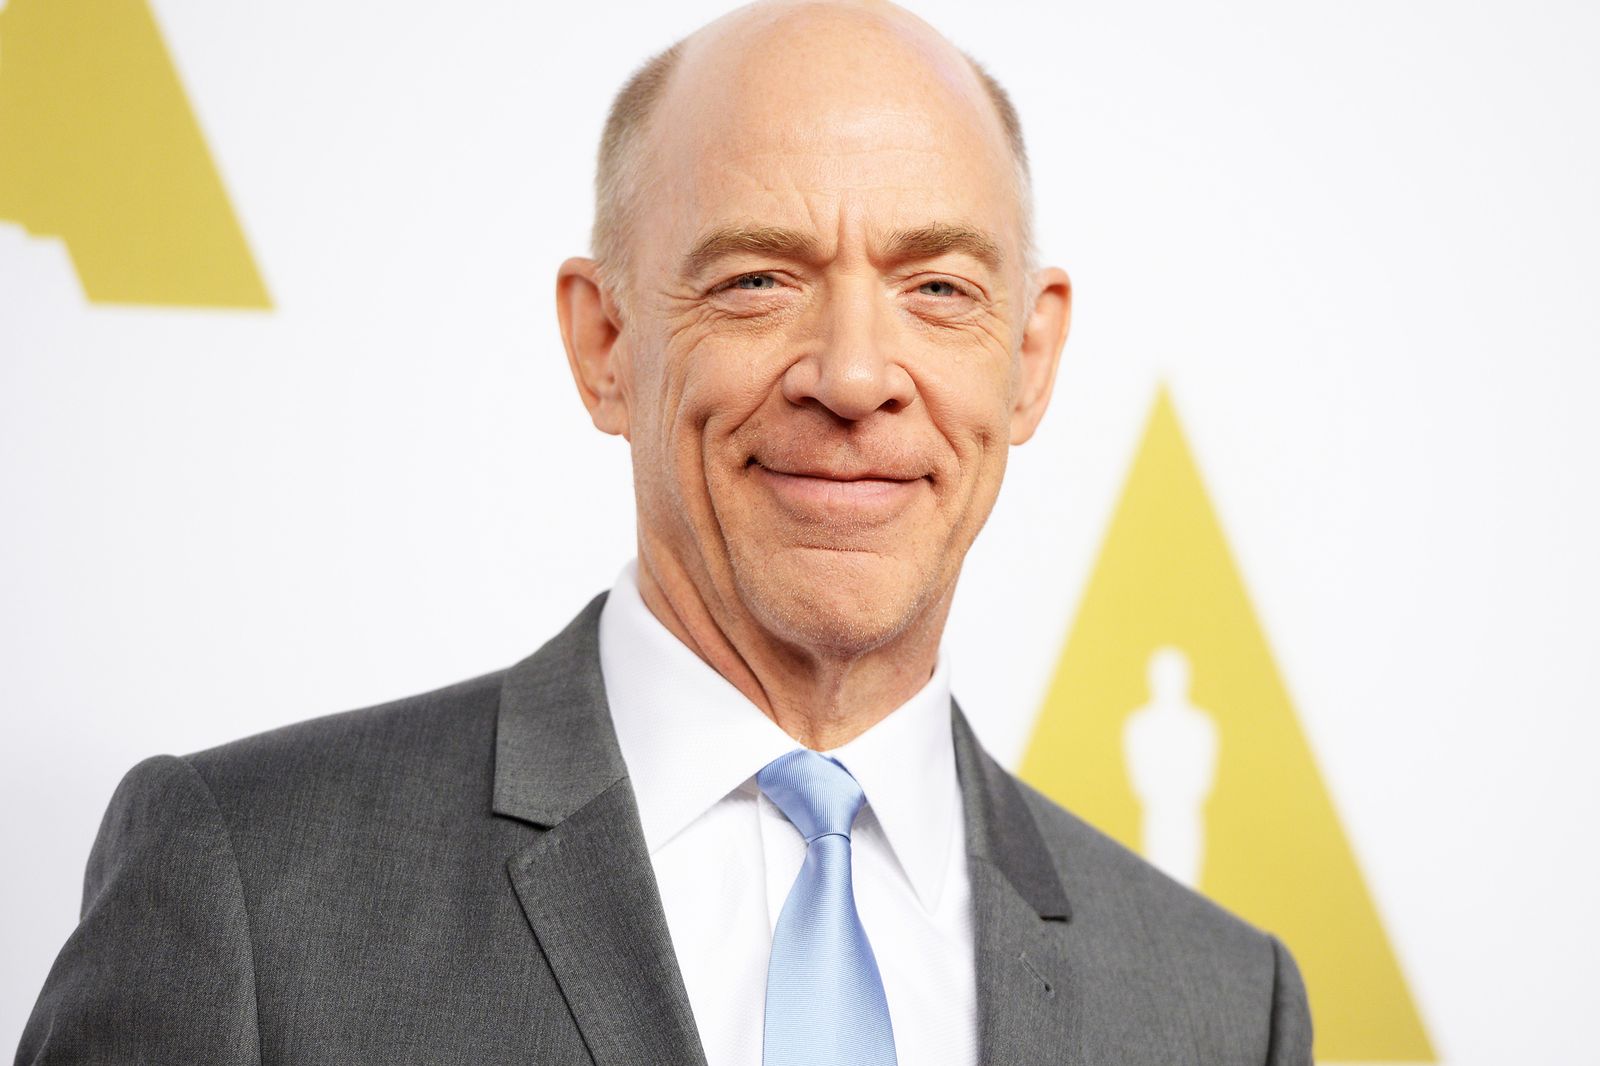 From J.J. Jameson To Commissioner Gordon, J.K. Simmons Bags Justice League